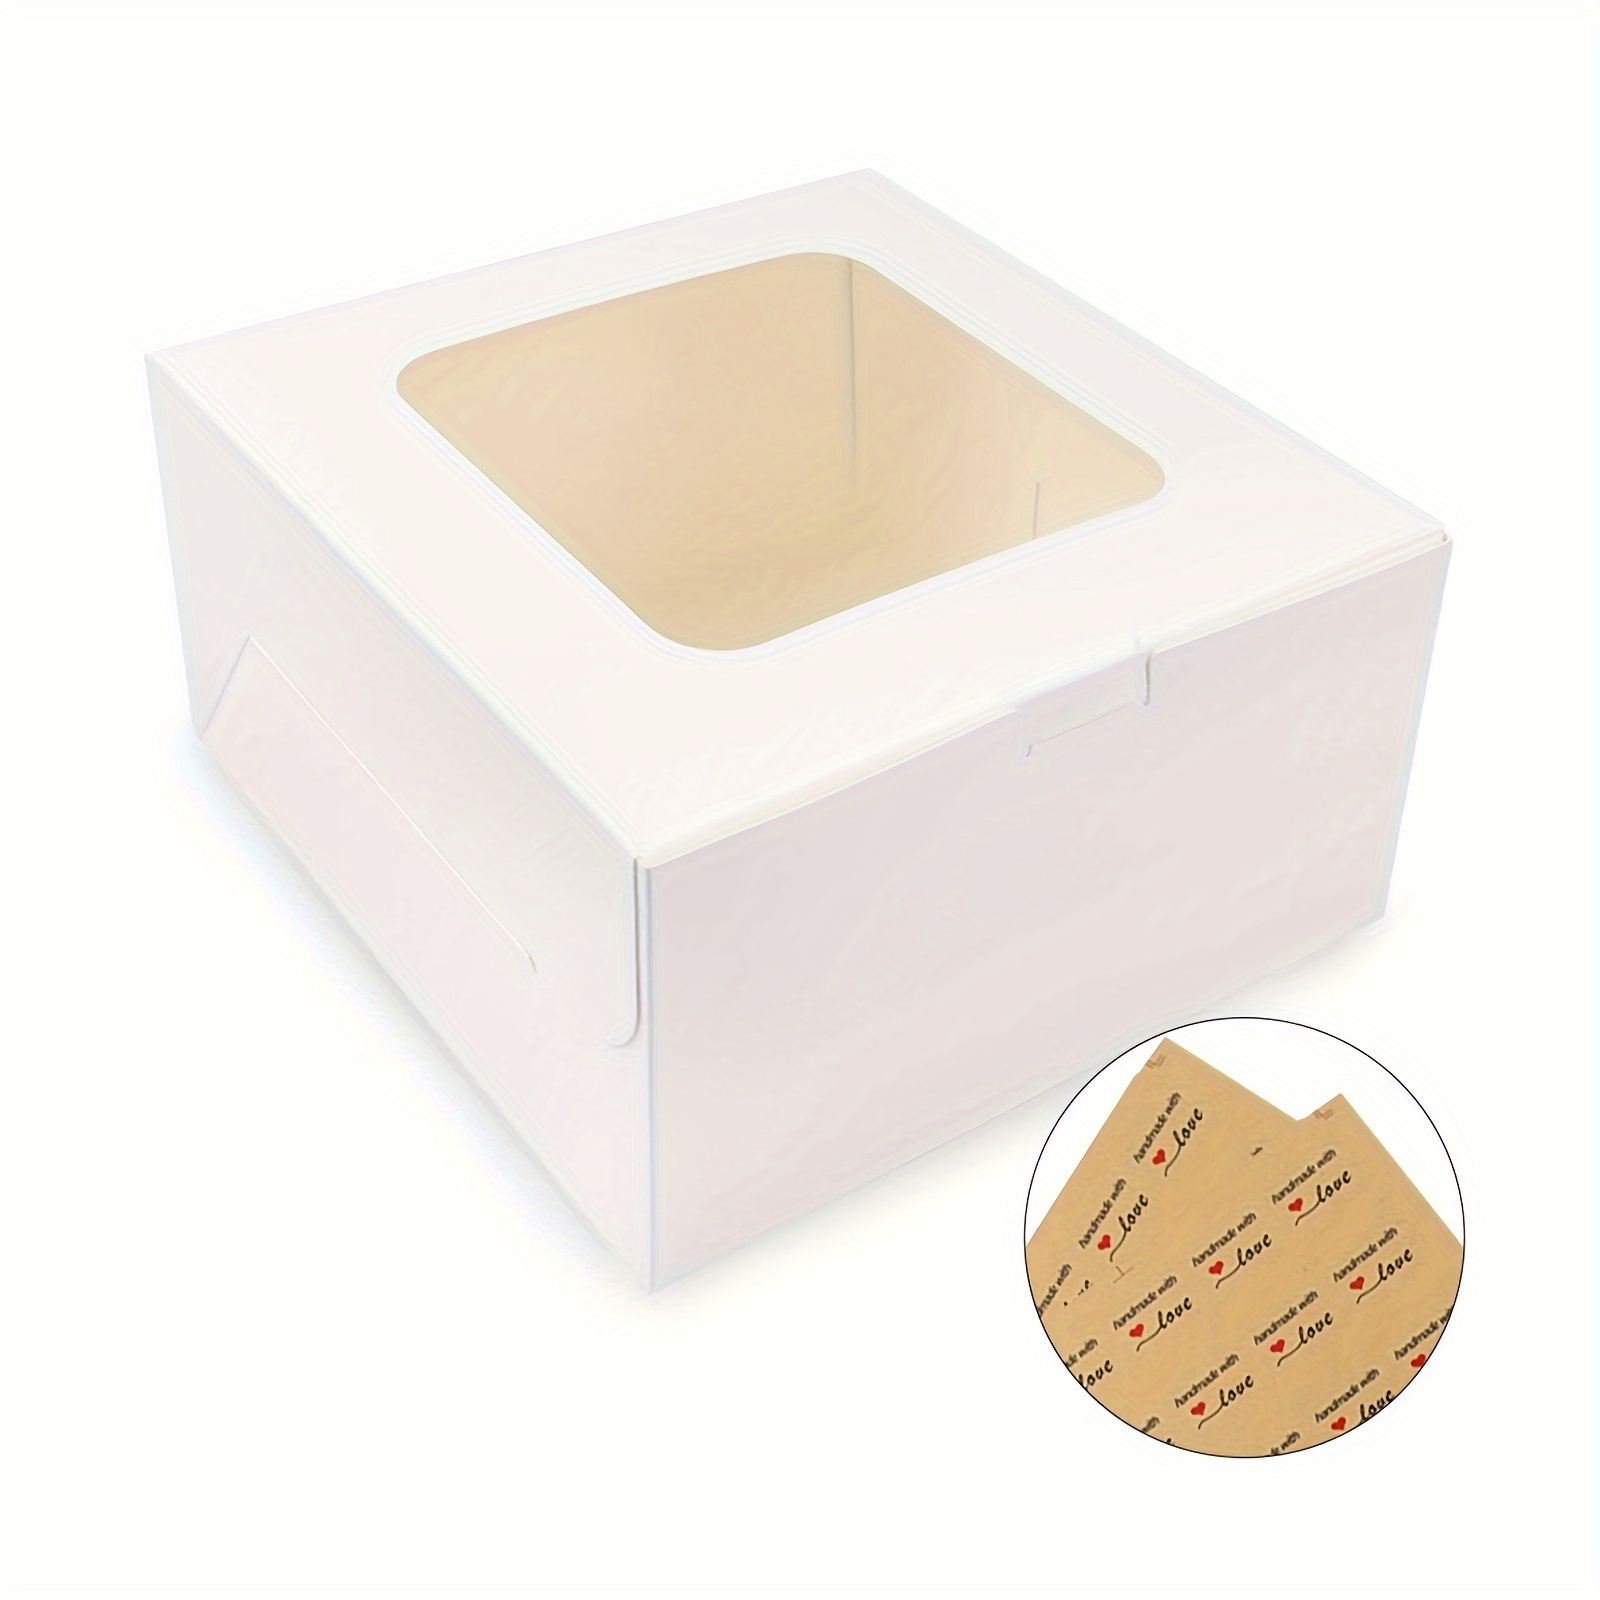 

24 Pcs Cake Boxes With Window, Pastry Boxes, Bakery Boxes, White Square Bakery Boxes, For Cake, Pastries, Chocolates, , Pie, Birthday Party, Wedding, 10x10x5 Inches